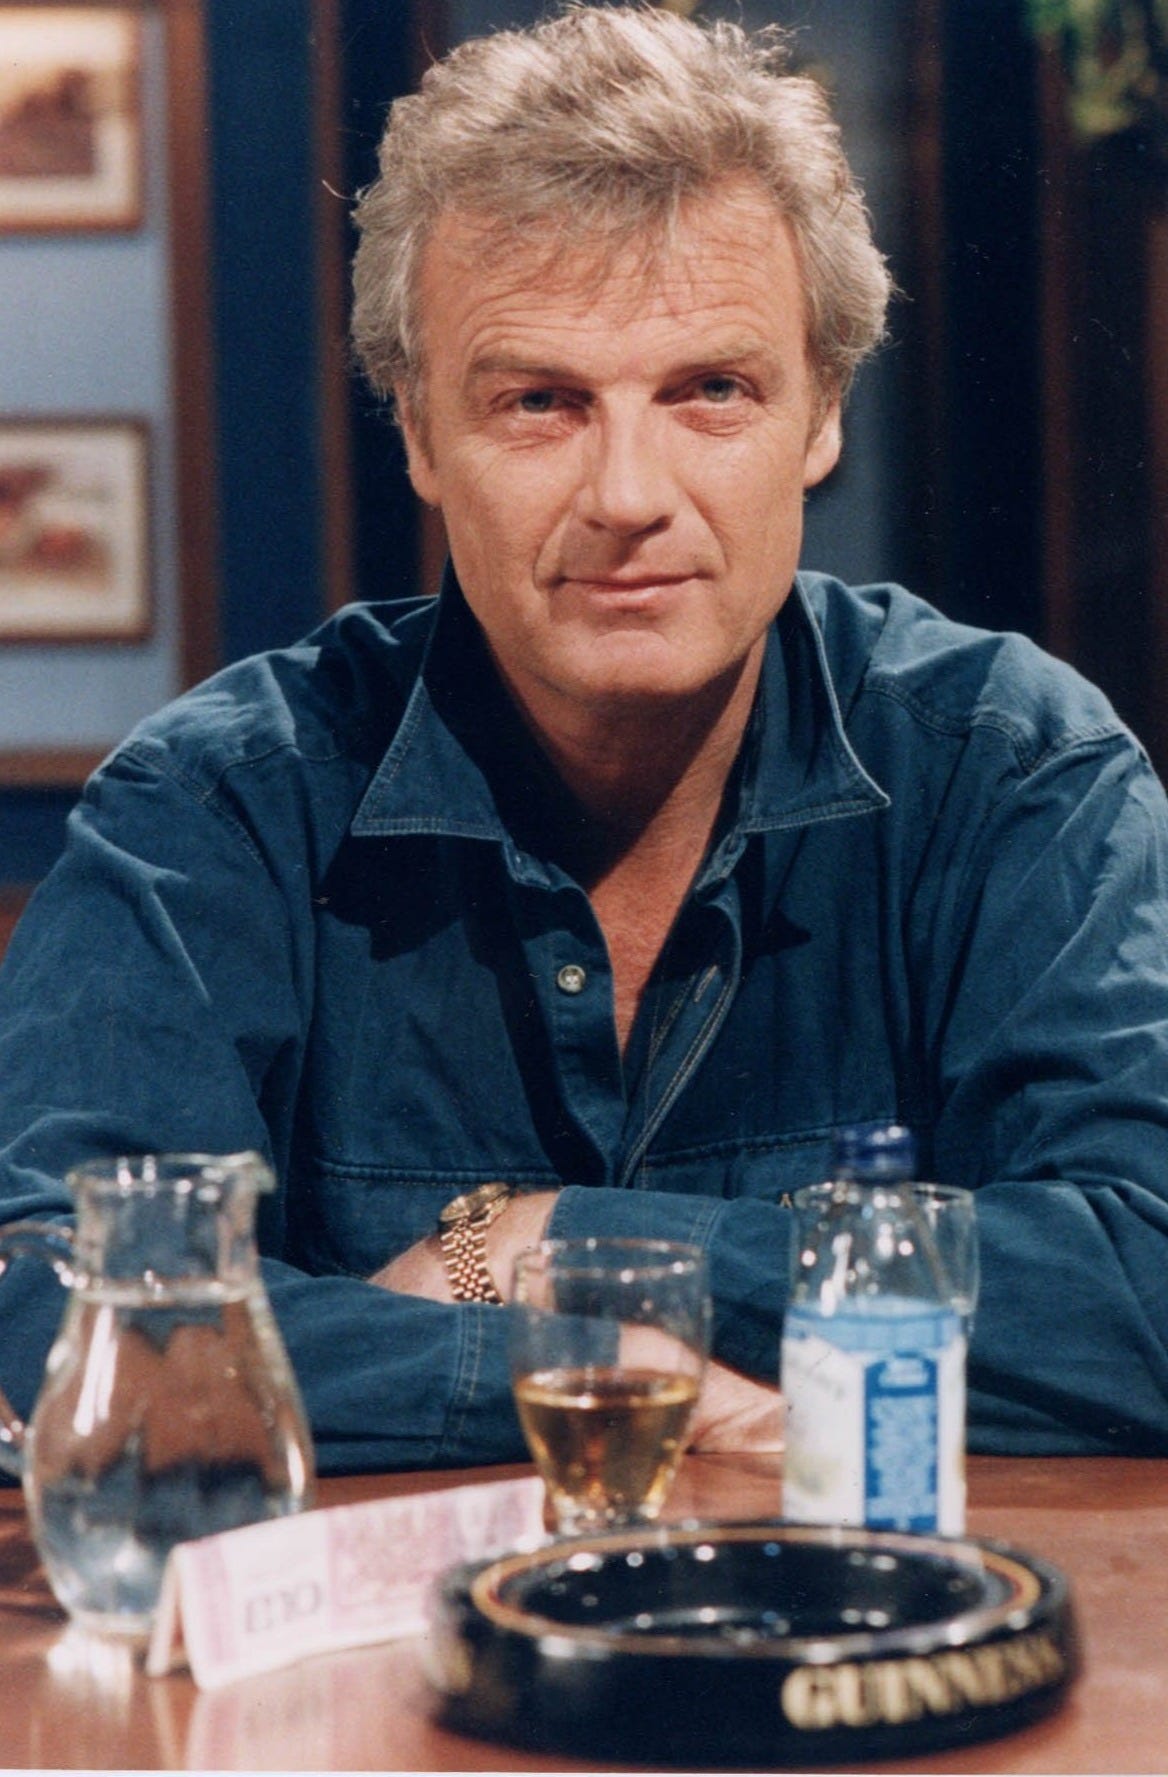 Emmet was best known for his role as Dick Moran on RTE's Glenroe